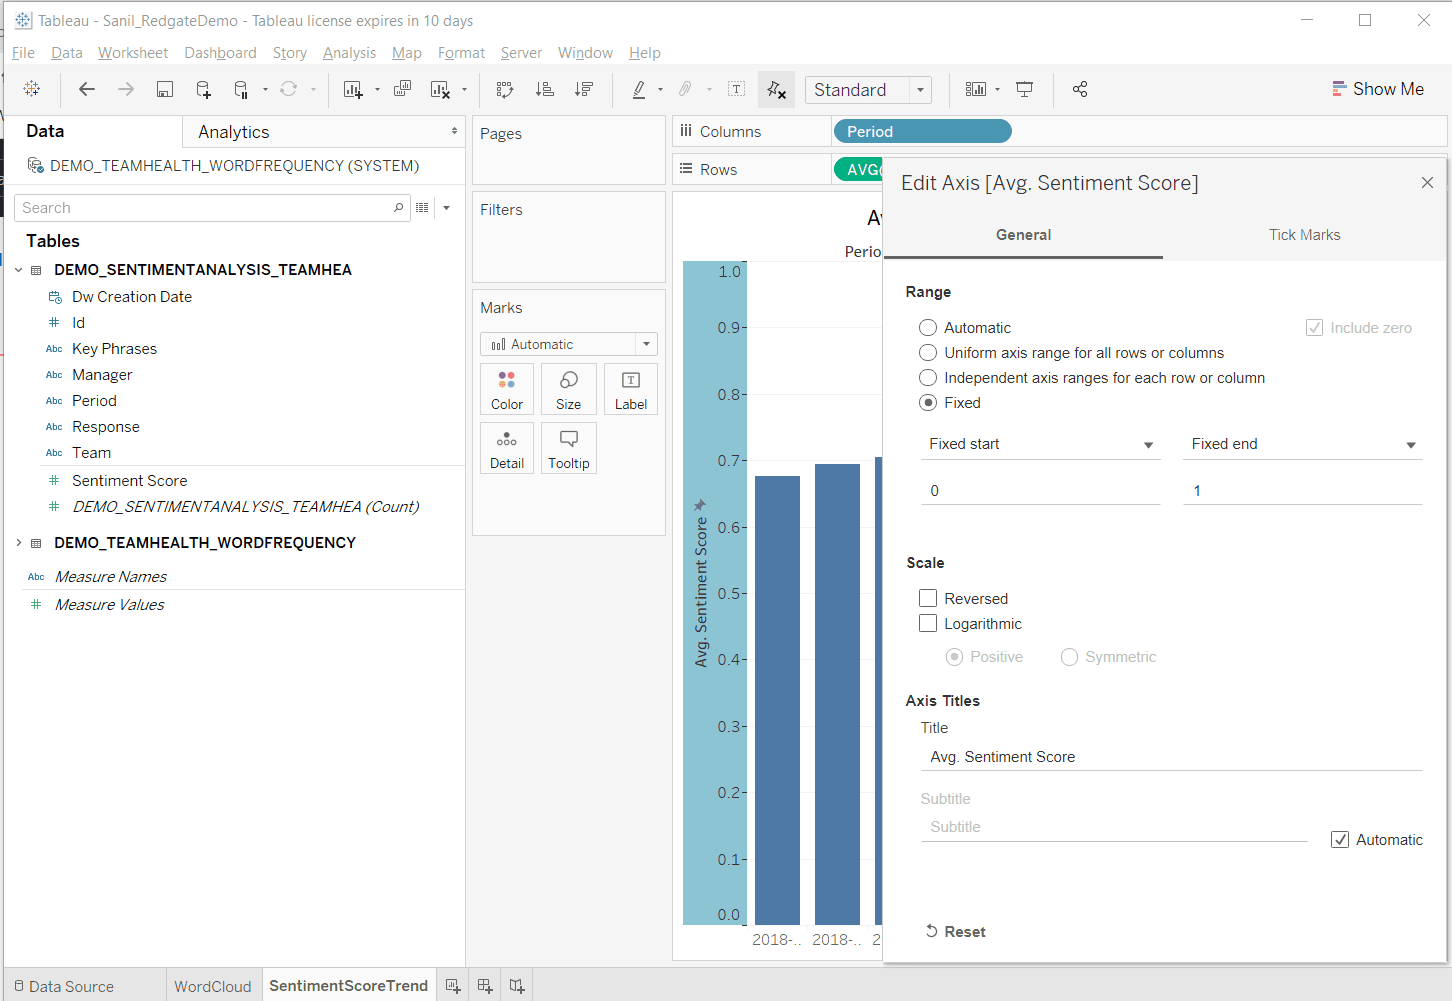 Image showing edit axis in Tableau